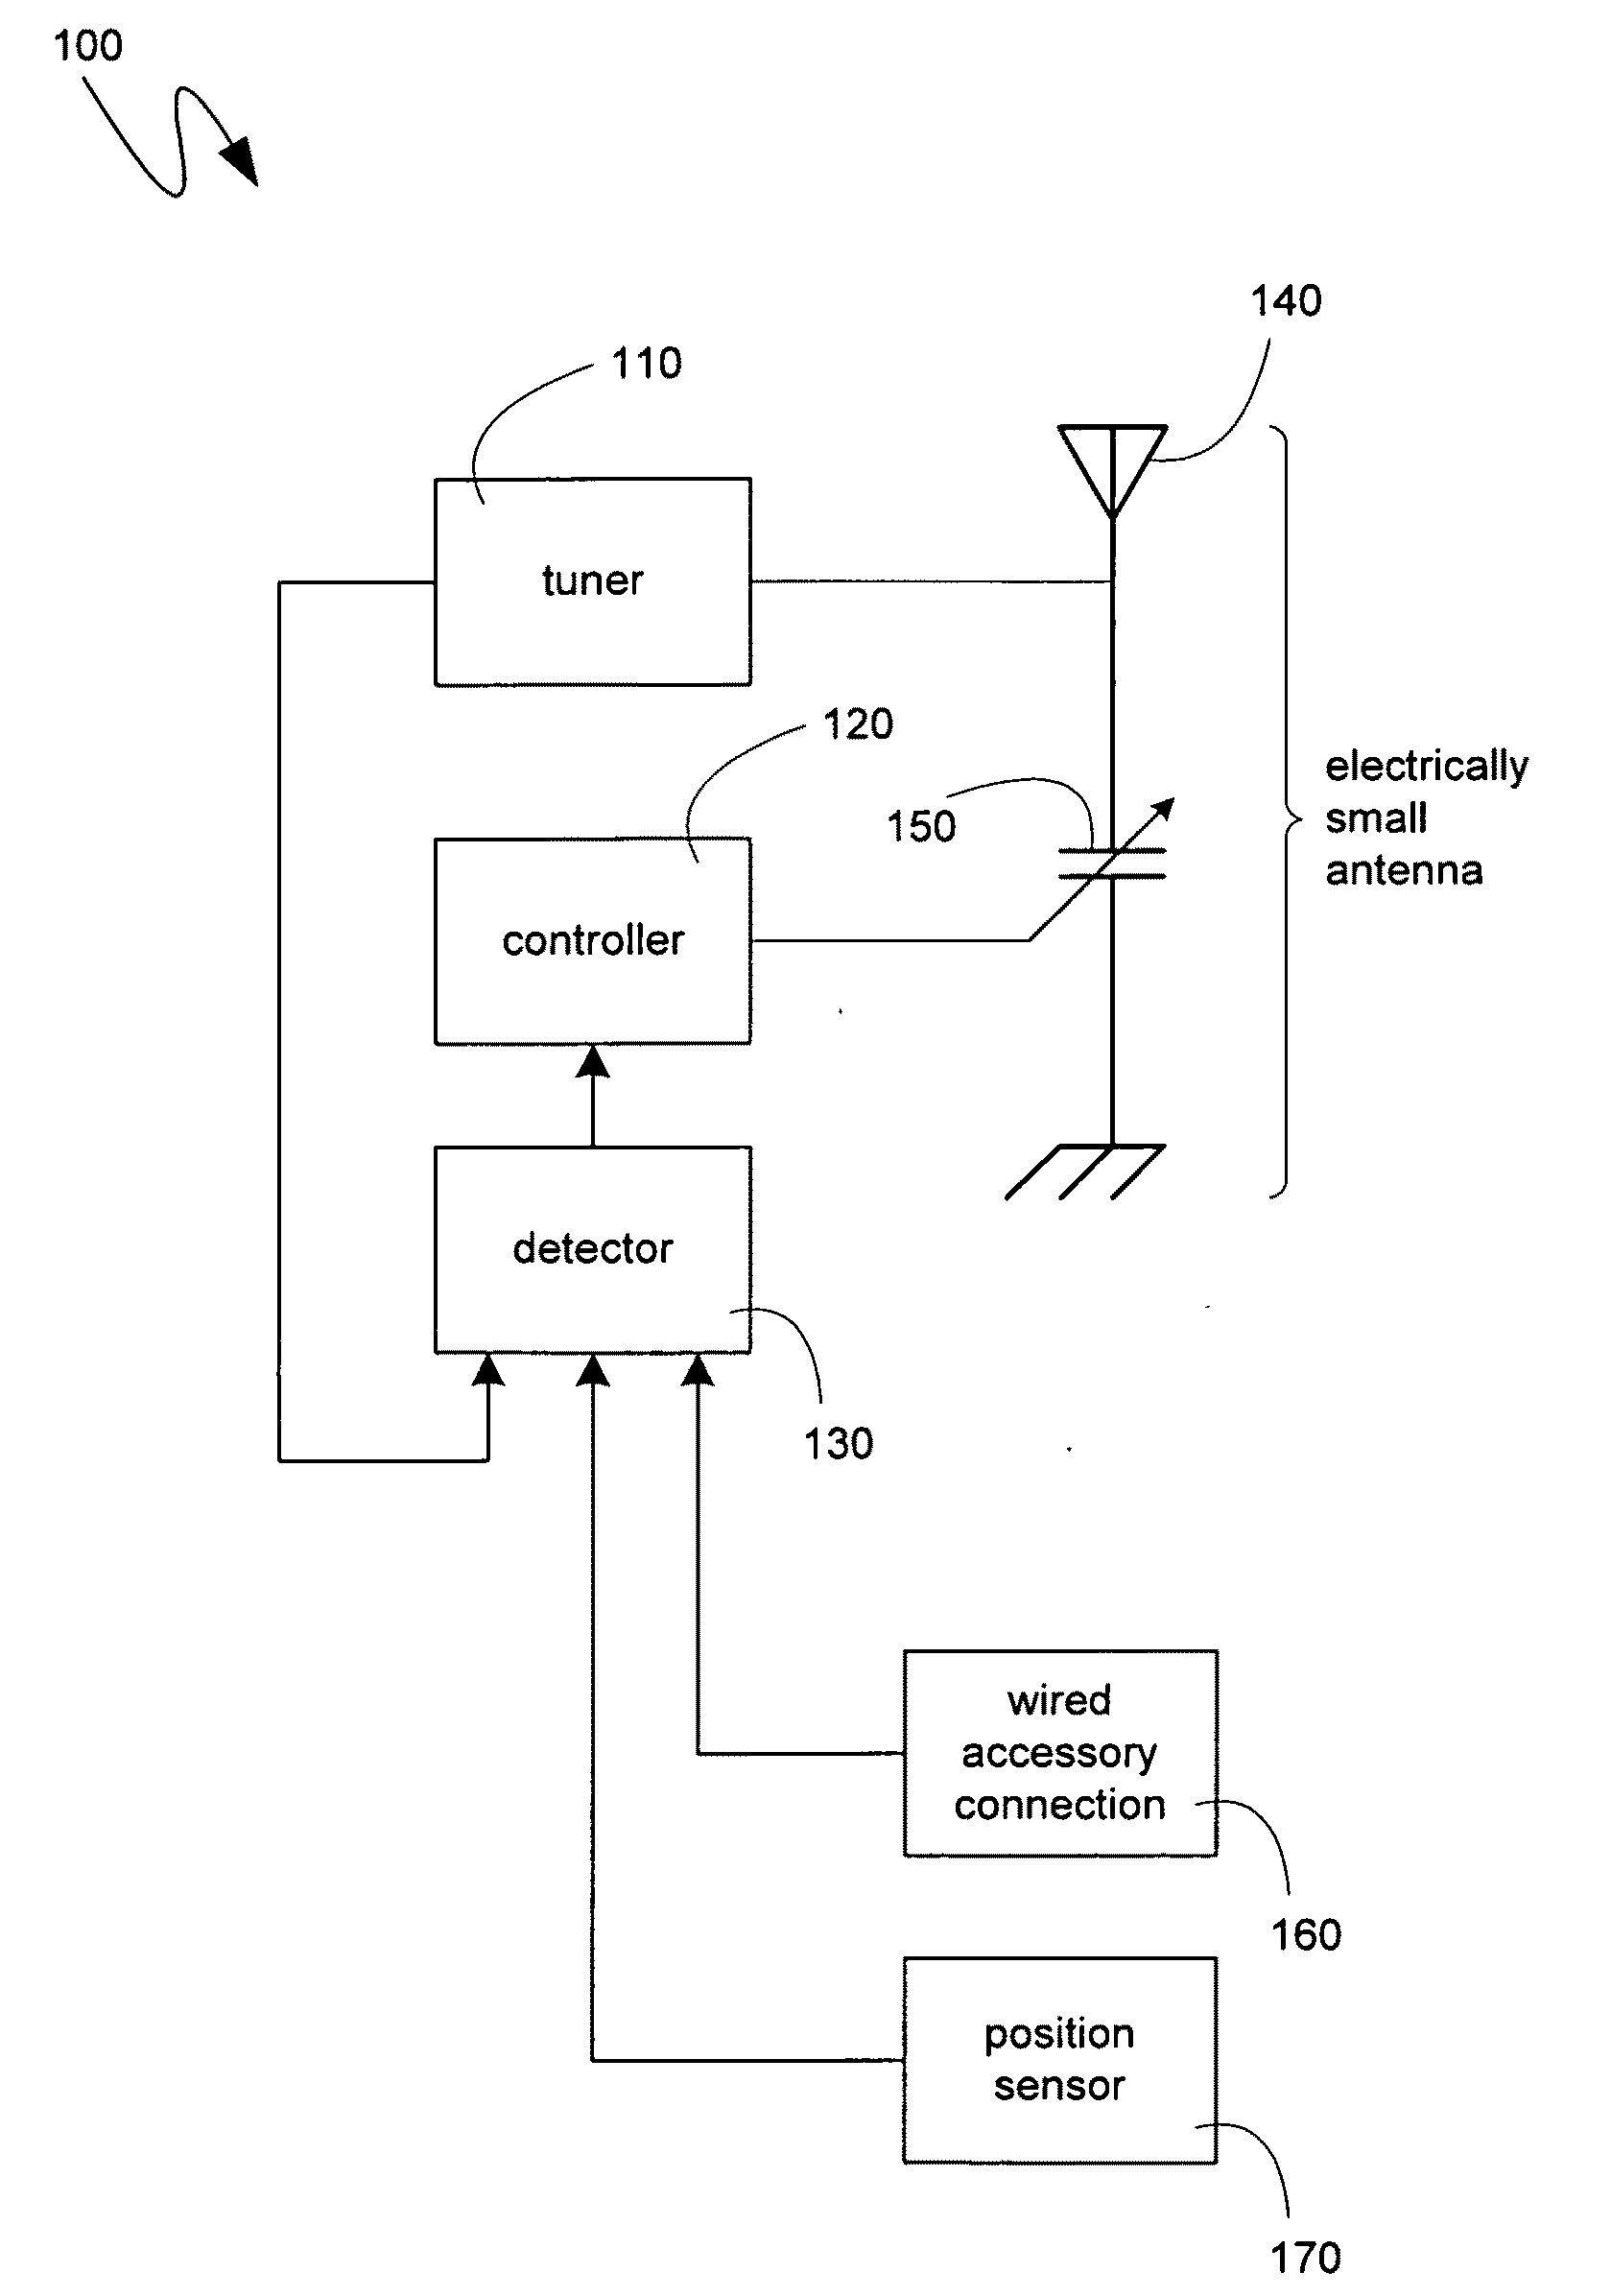 Tuning an electrically small antenna